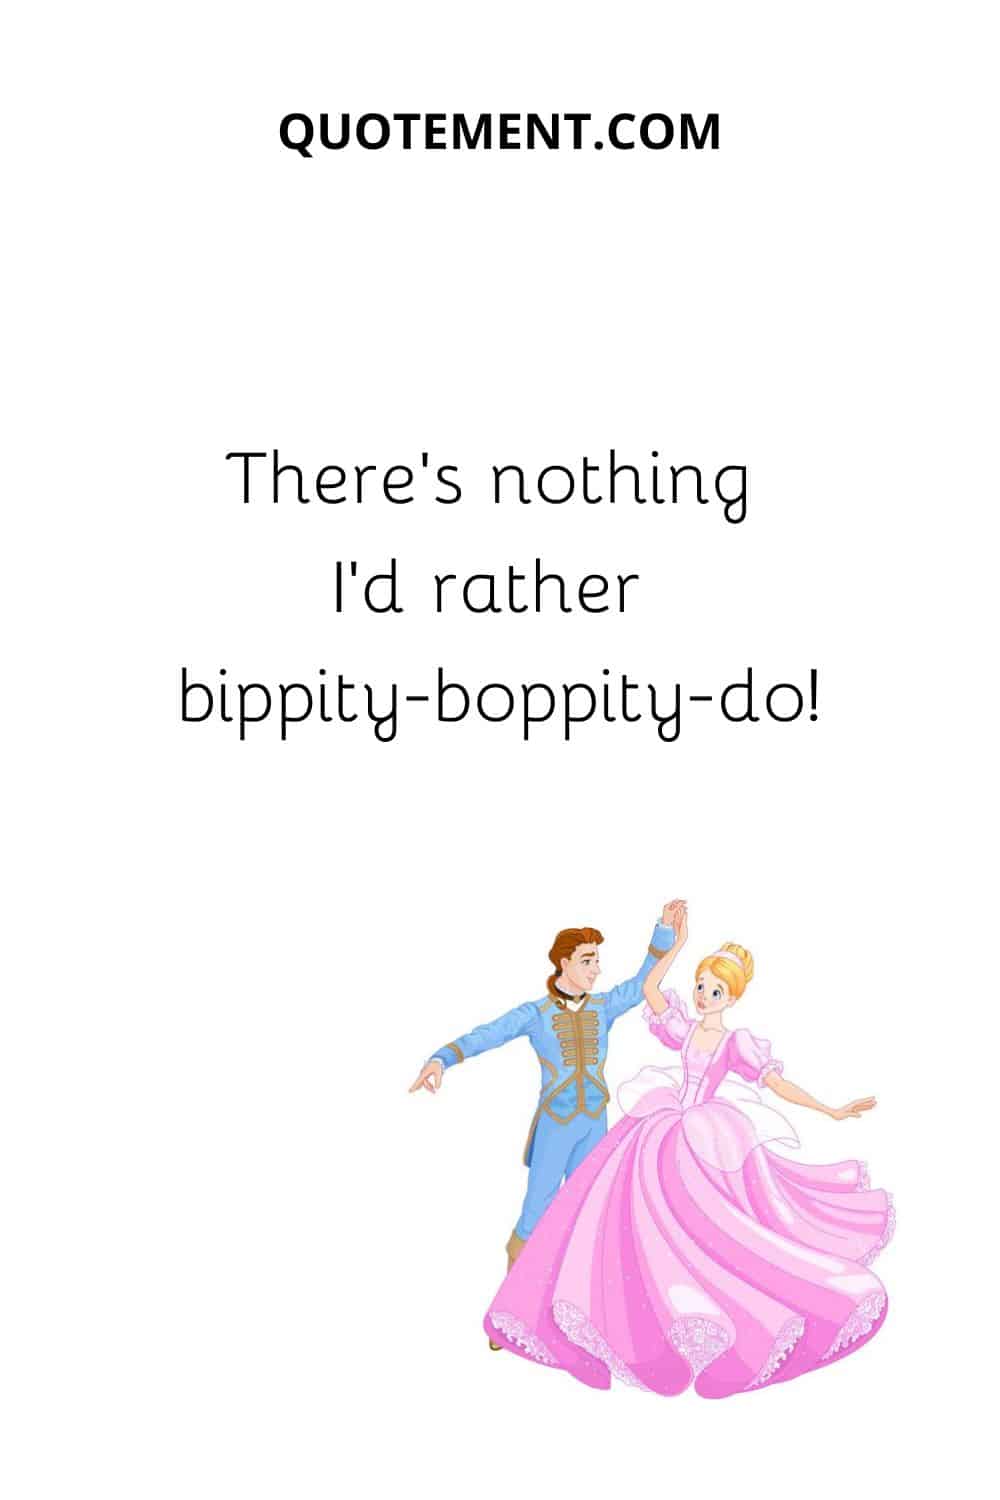 There’s nothing I’d rather bippity-boppity-do!